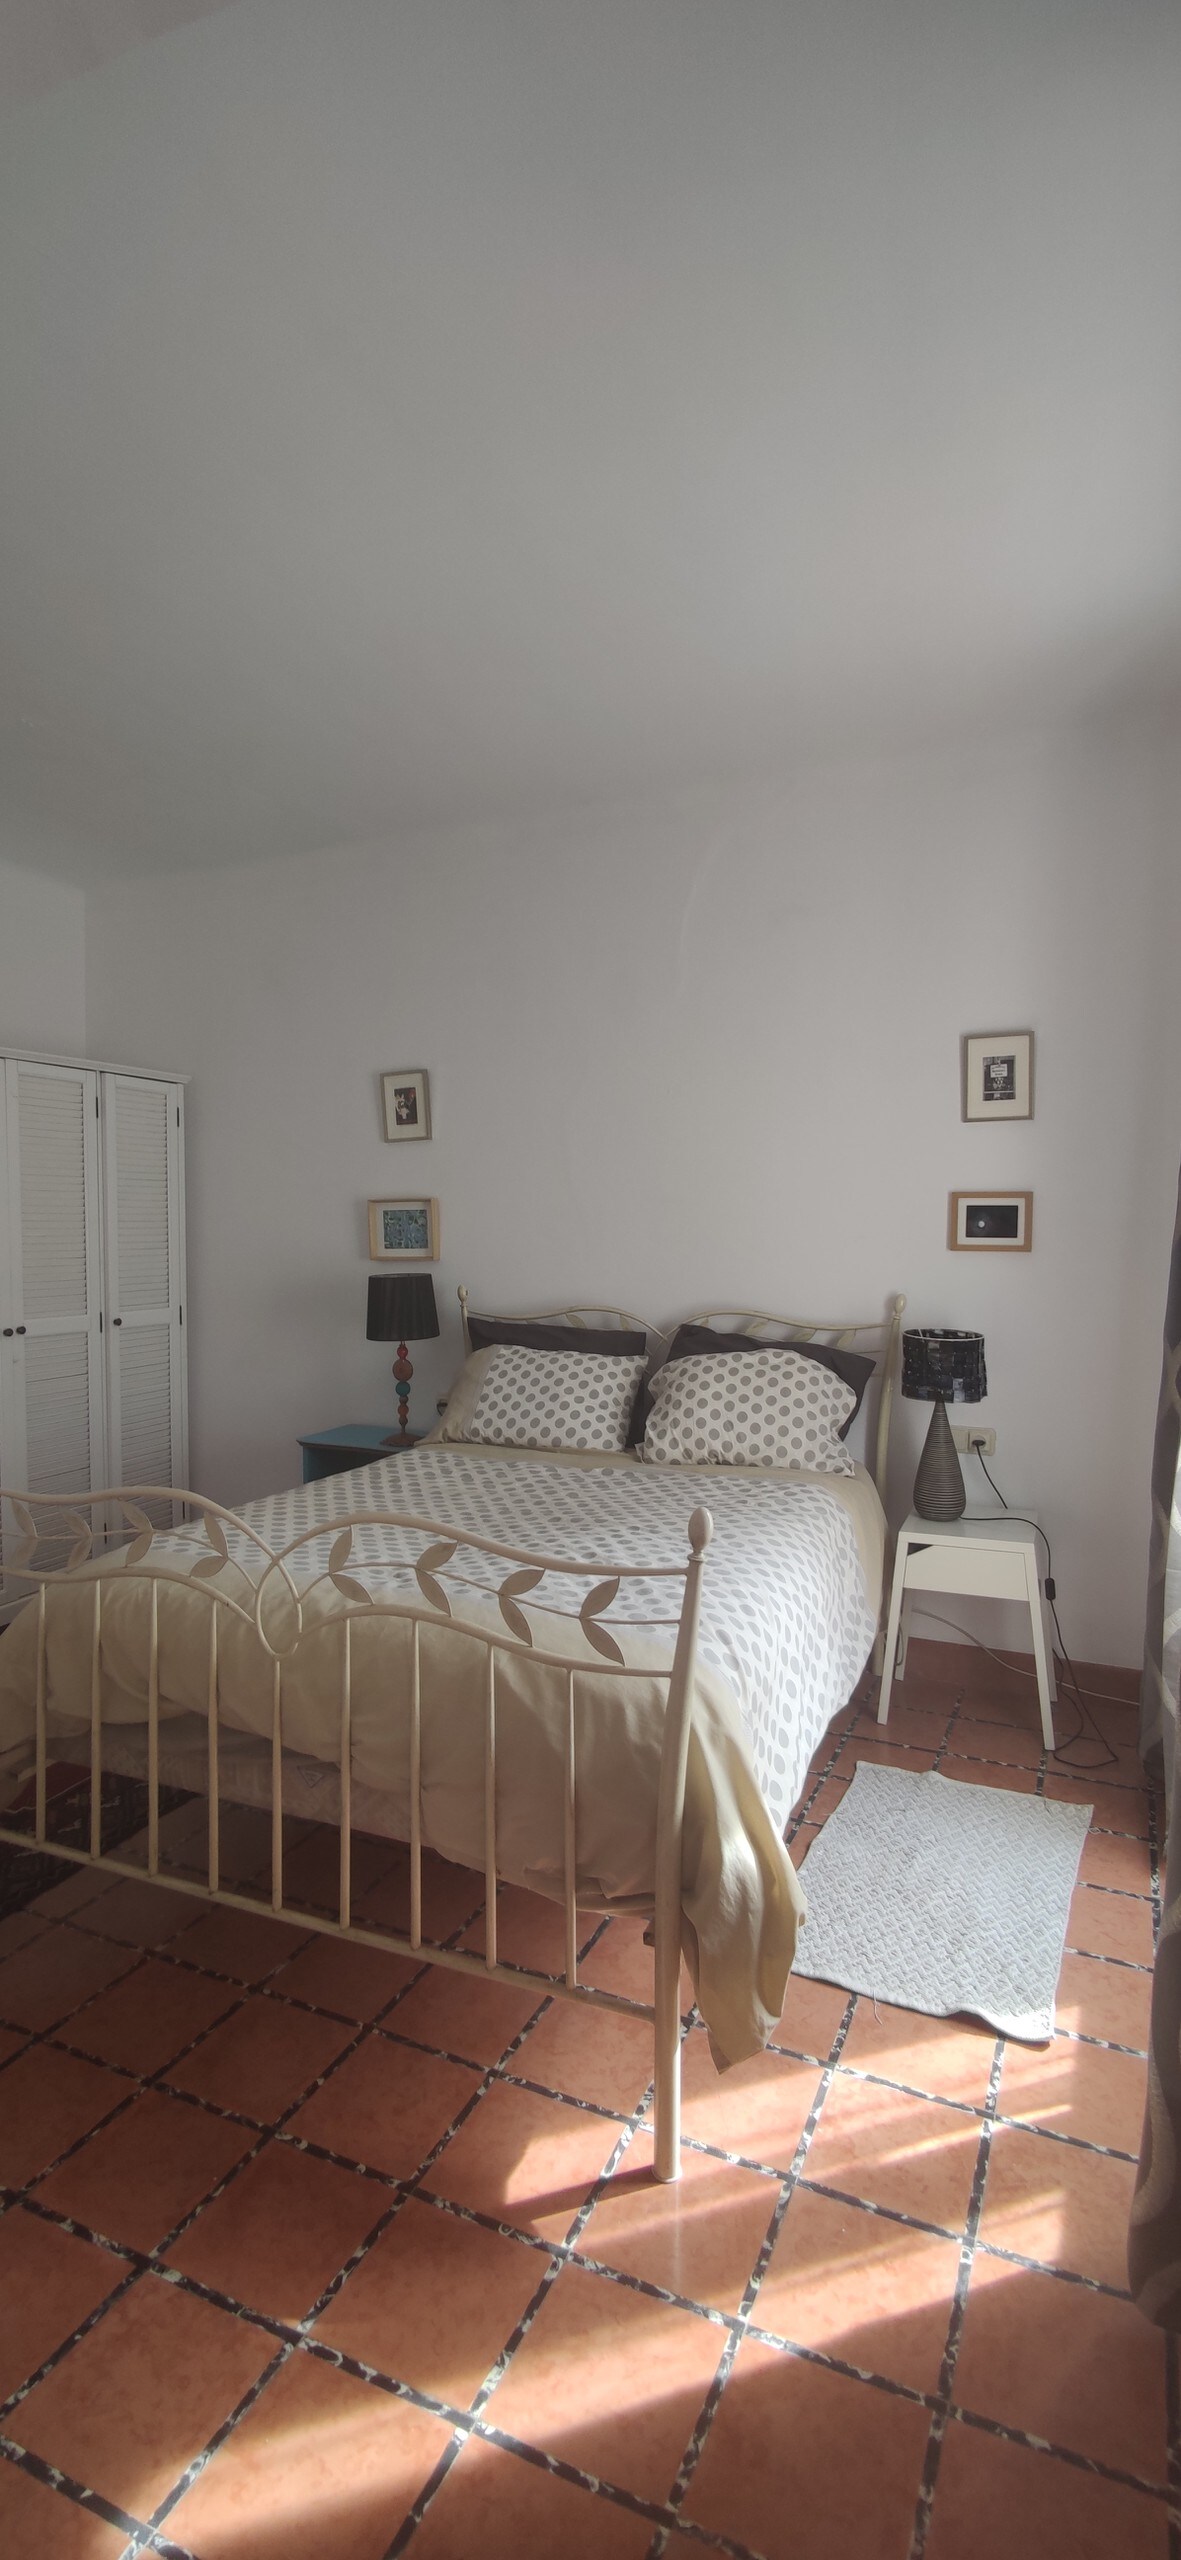 Heating, air con, comfy bedroom, central Figueres.